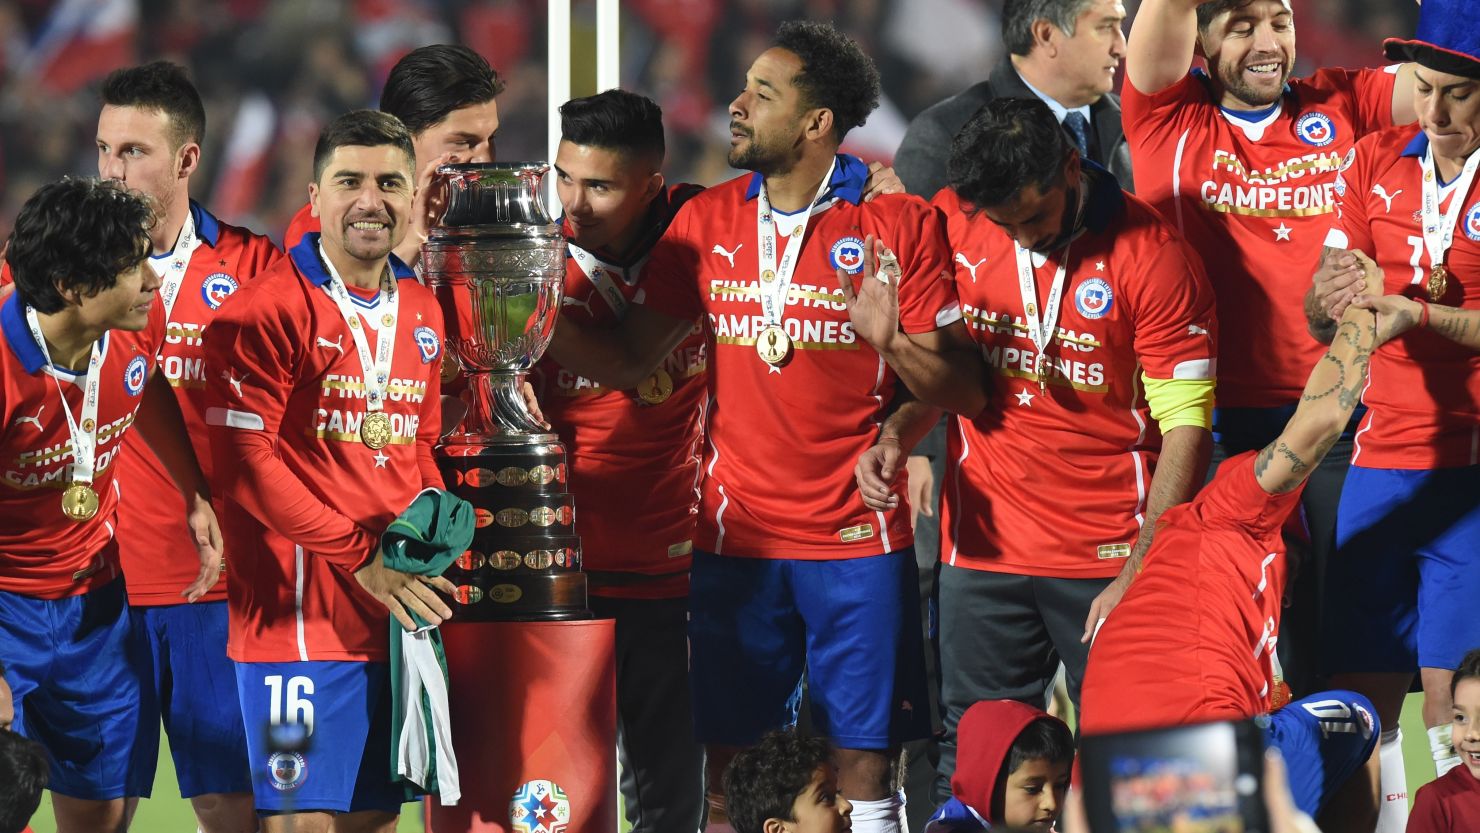 Chile's players celebrate with the Copa America trophy after being Argentina on penalties in the final in Santiago.